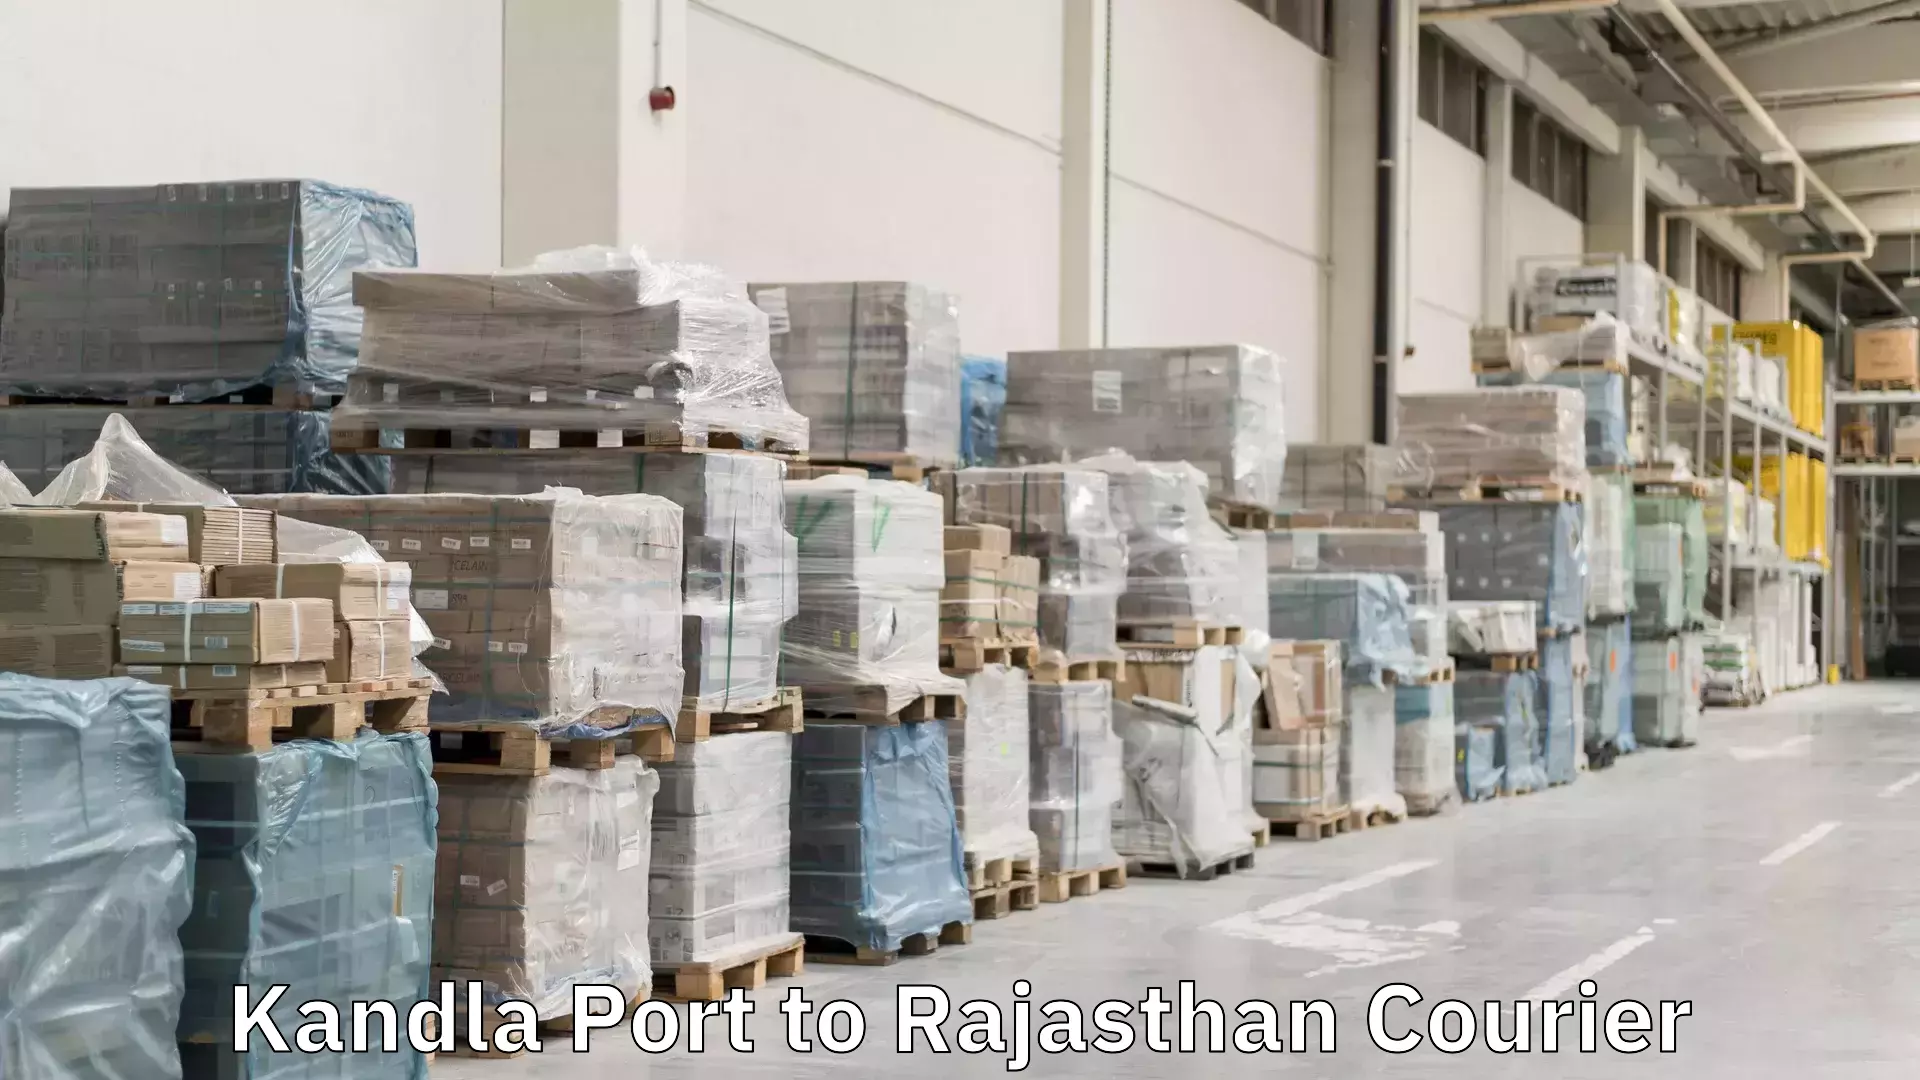 On-call courier service Kandla Port to Rajasthan